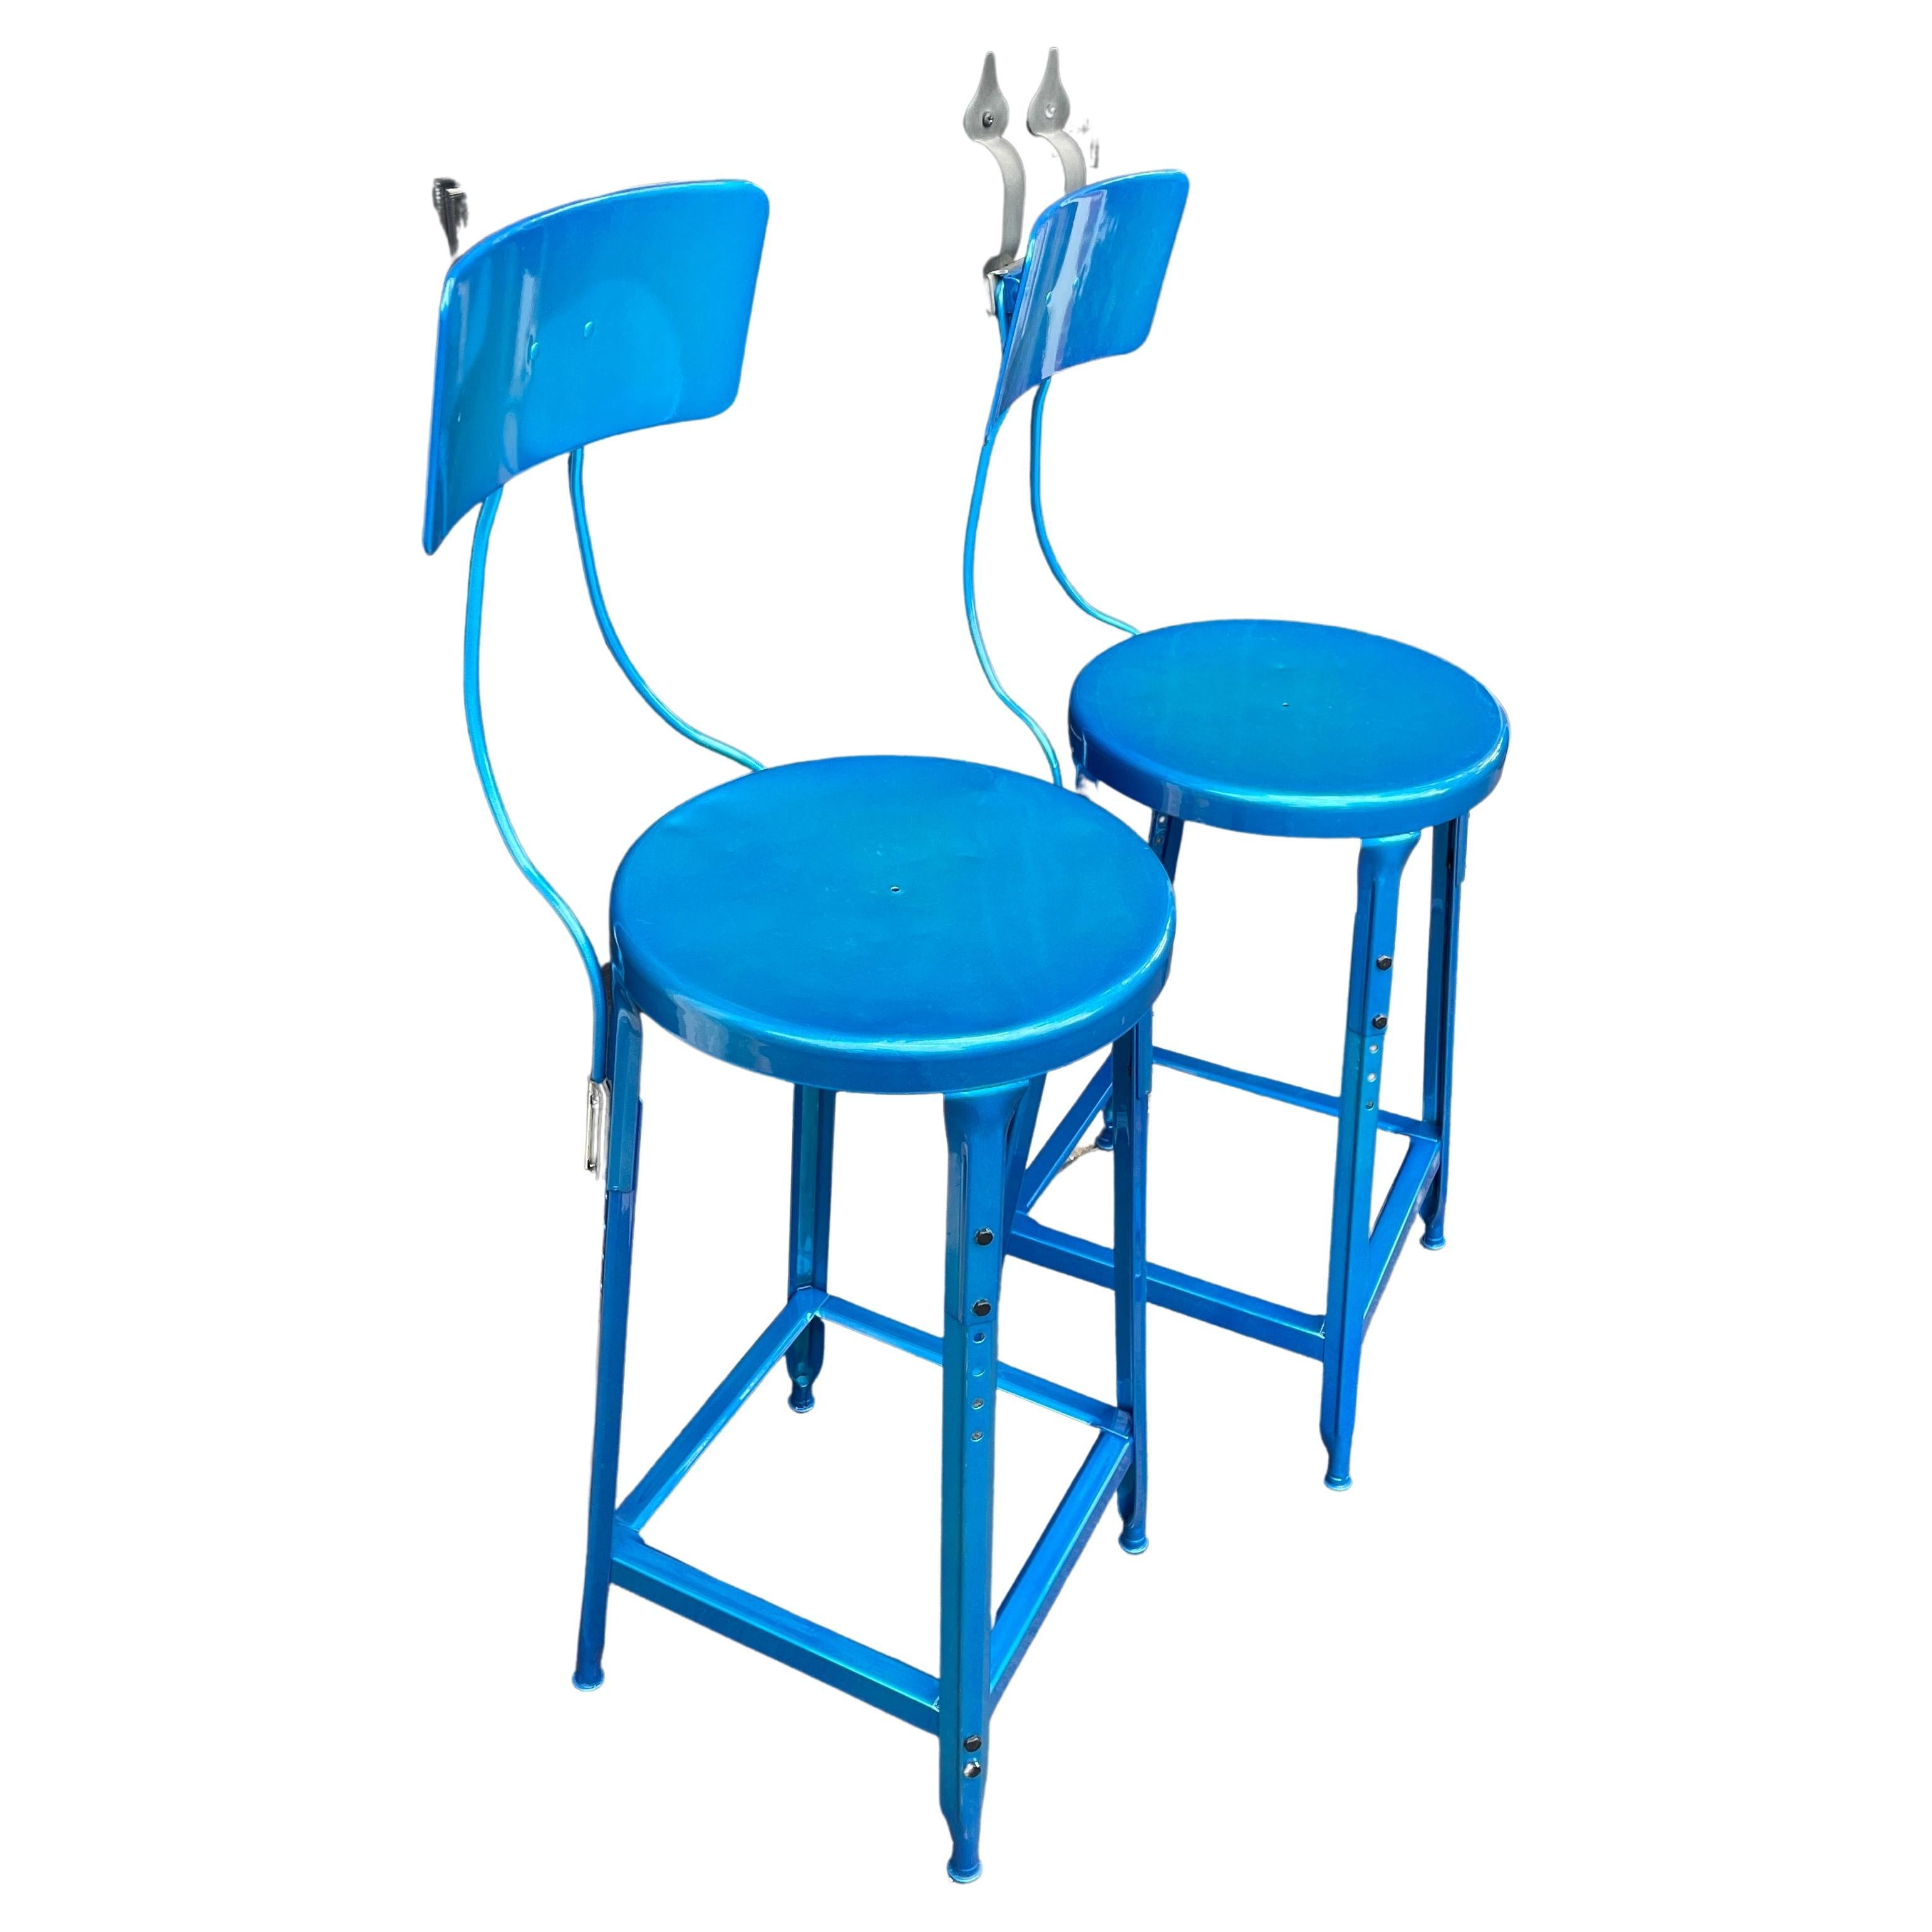 Powder-Coated Set of Two Heavy Industrial Bar Stools in Powder Coated Blue For Sale